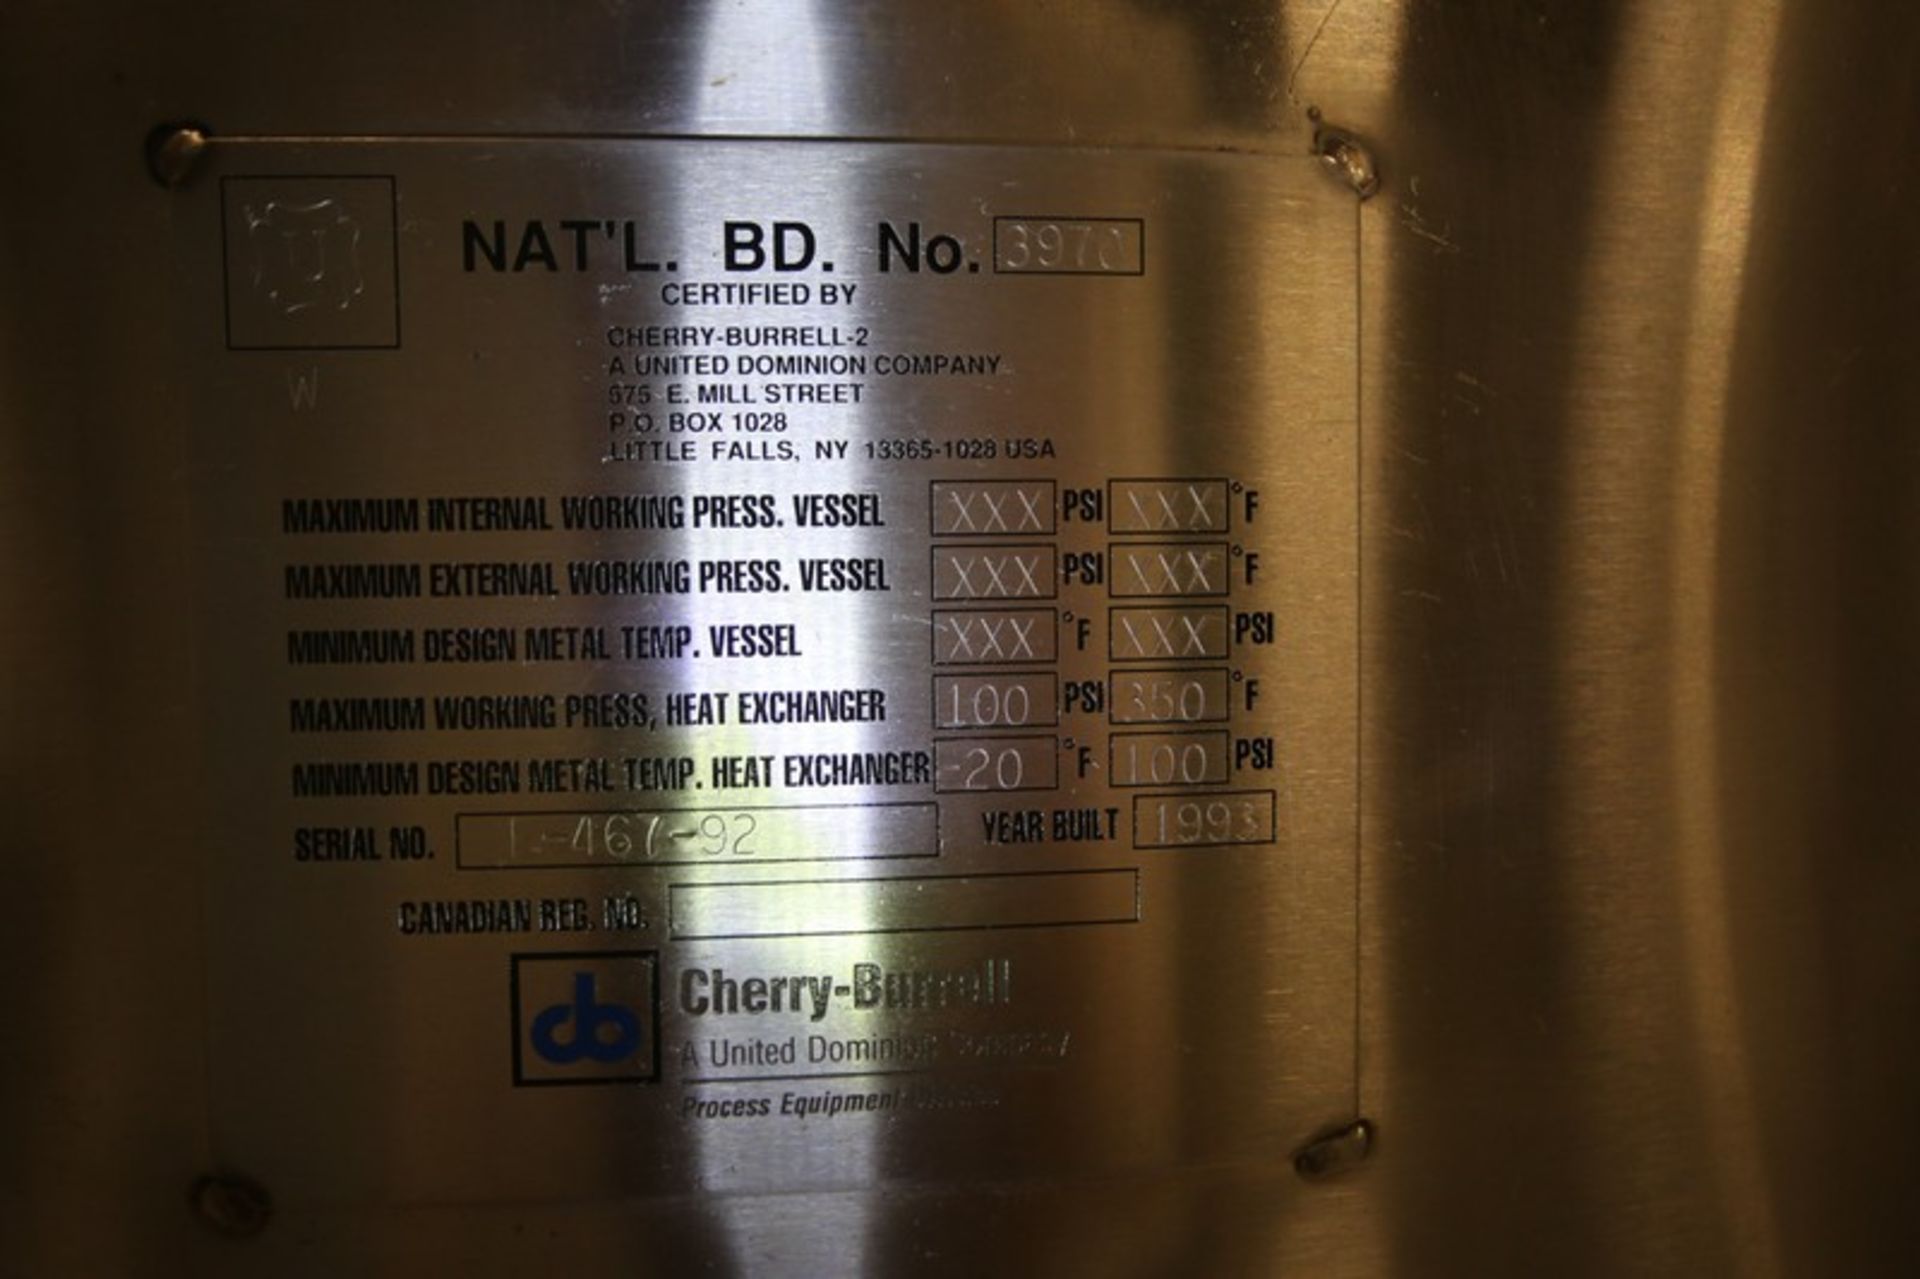 Cherry-Burrell Hinged Lid, Aprox. 300 Gallon S/S Processor, SN E-467-92, No. 1044, Lechithin Tank, - Image 9 of 9